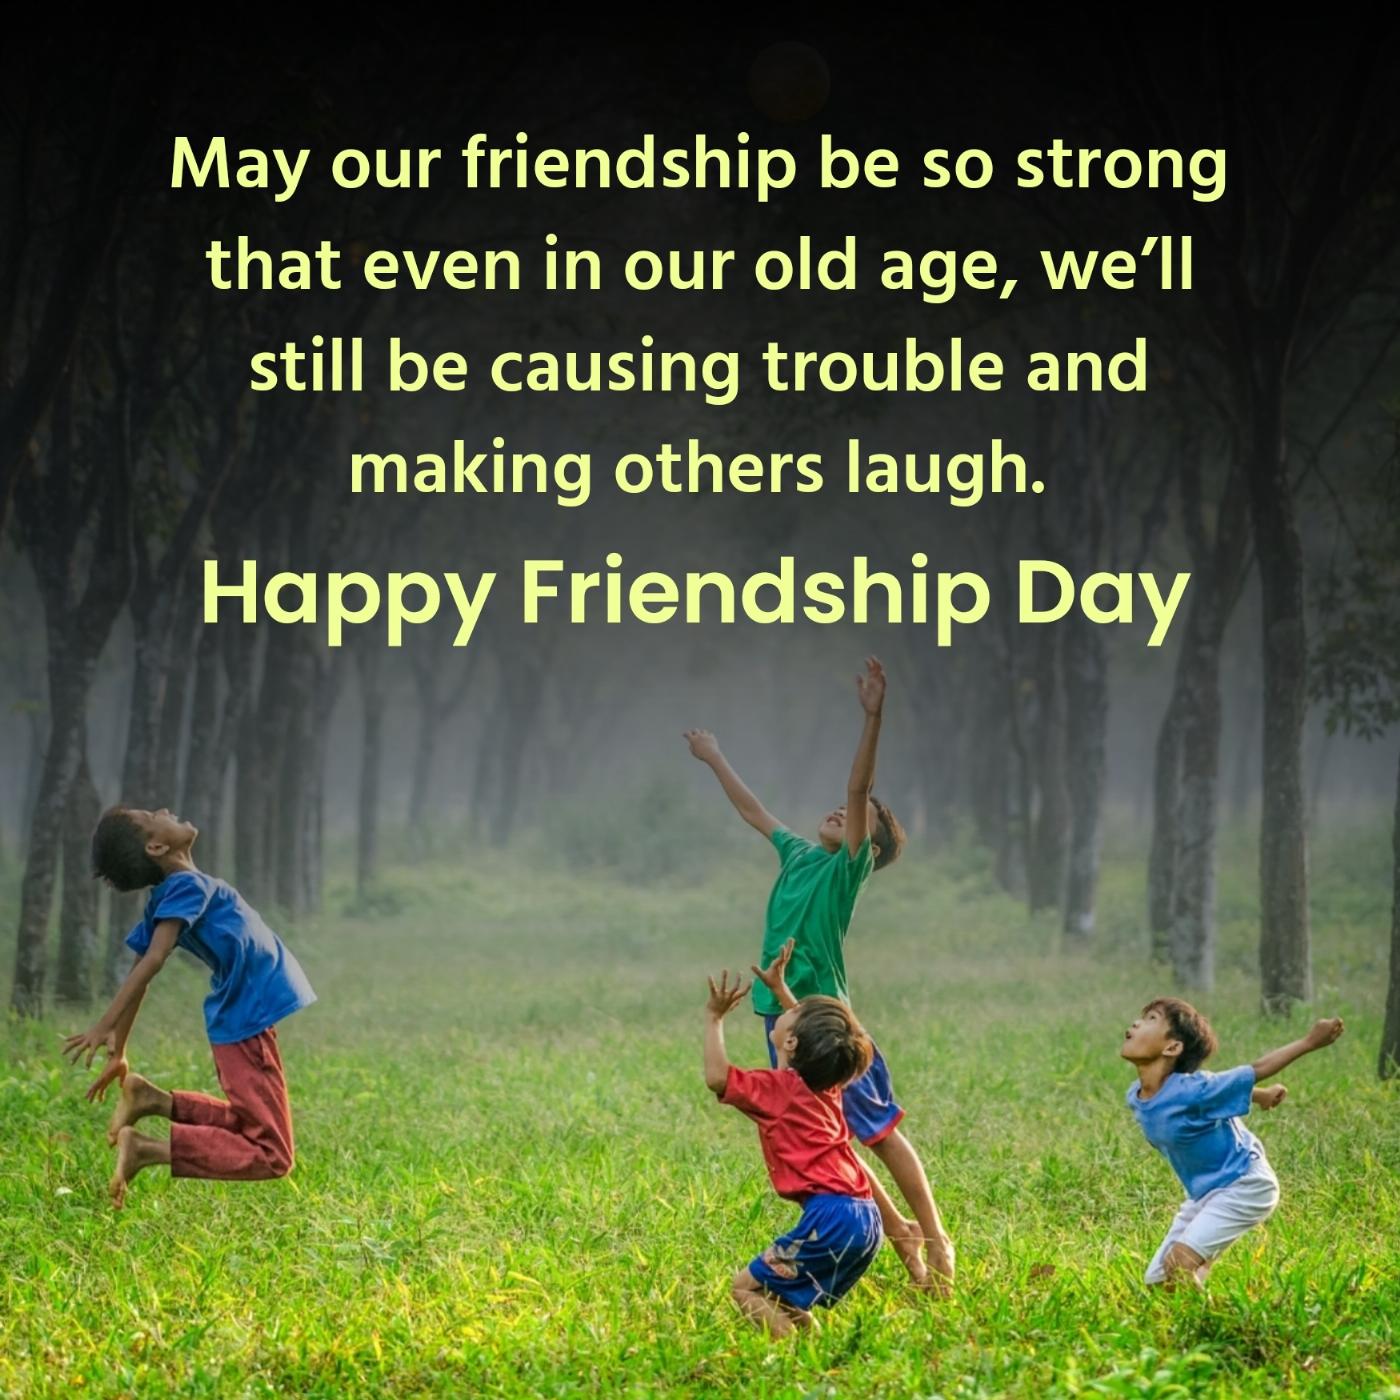 May our friendship be so strong that even in our old age